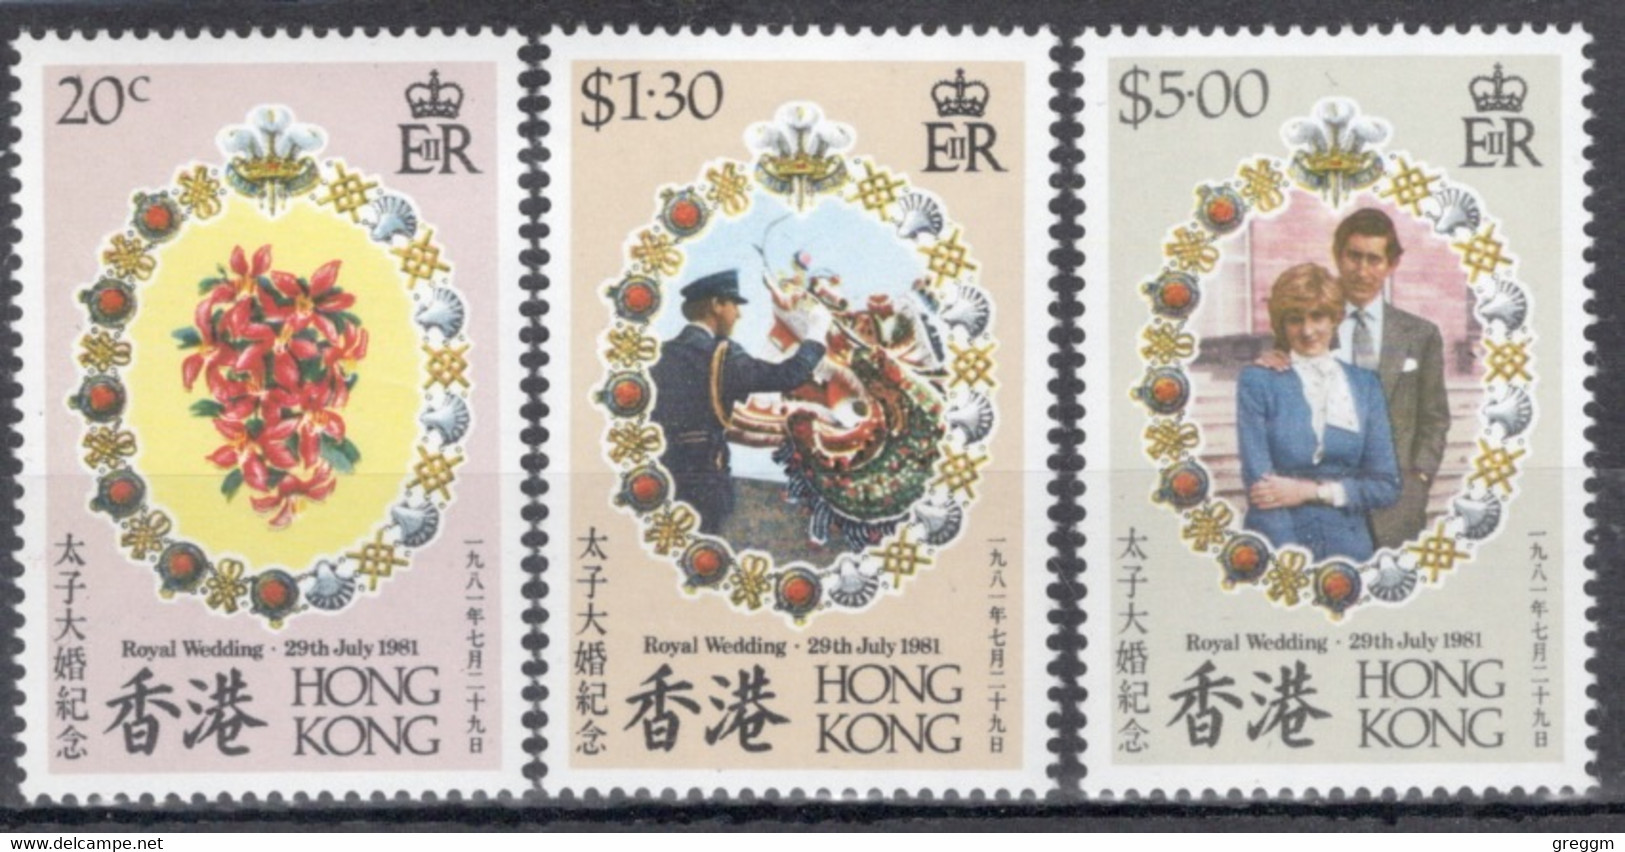 Hong Kong 1981 Set Of Stamps To Celebrate The Wedding Of Charles And Diana In Unmounted Mint. - Ongebruikt